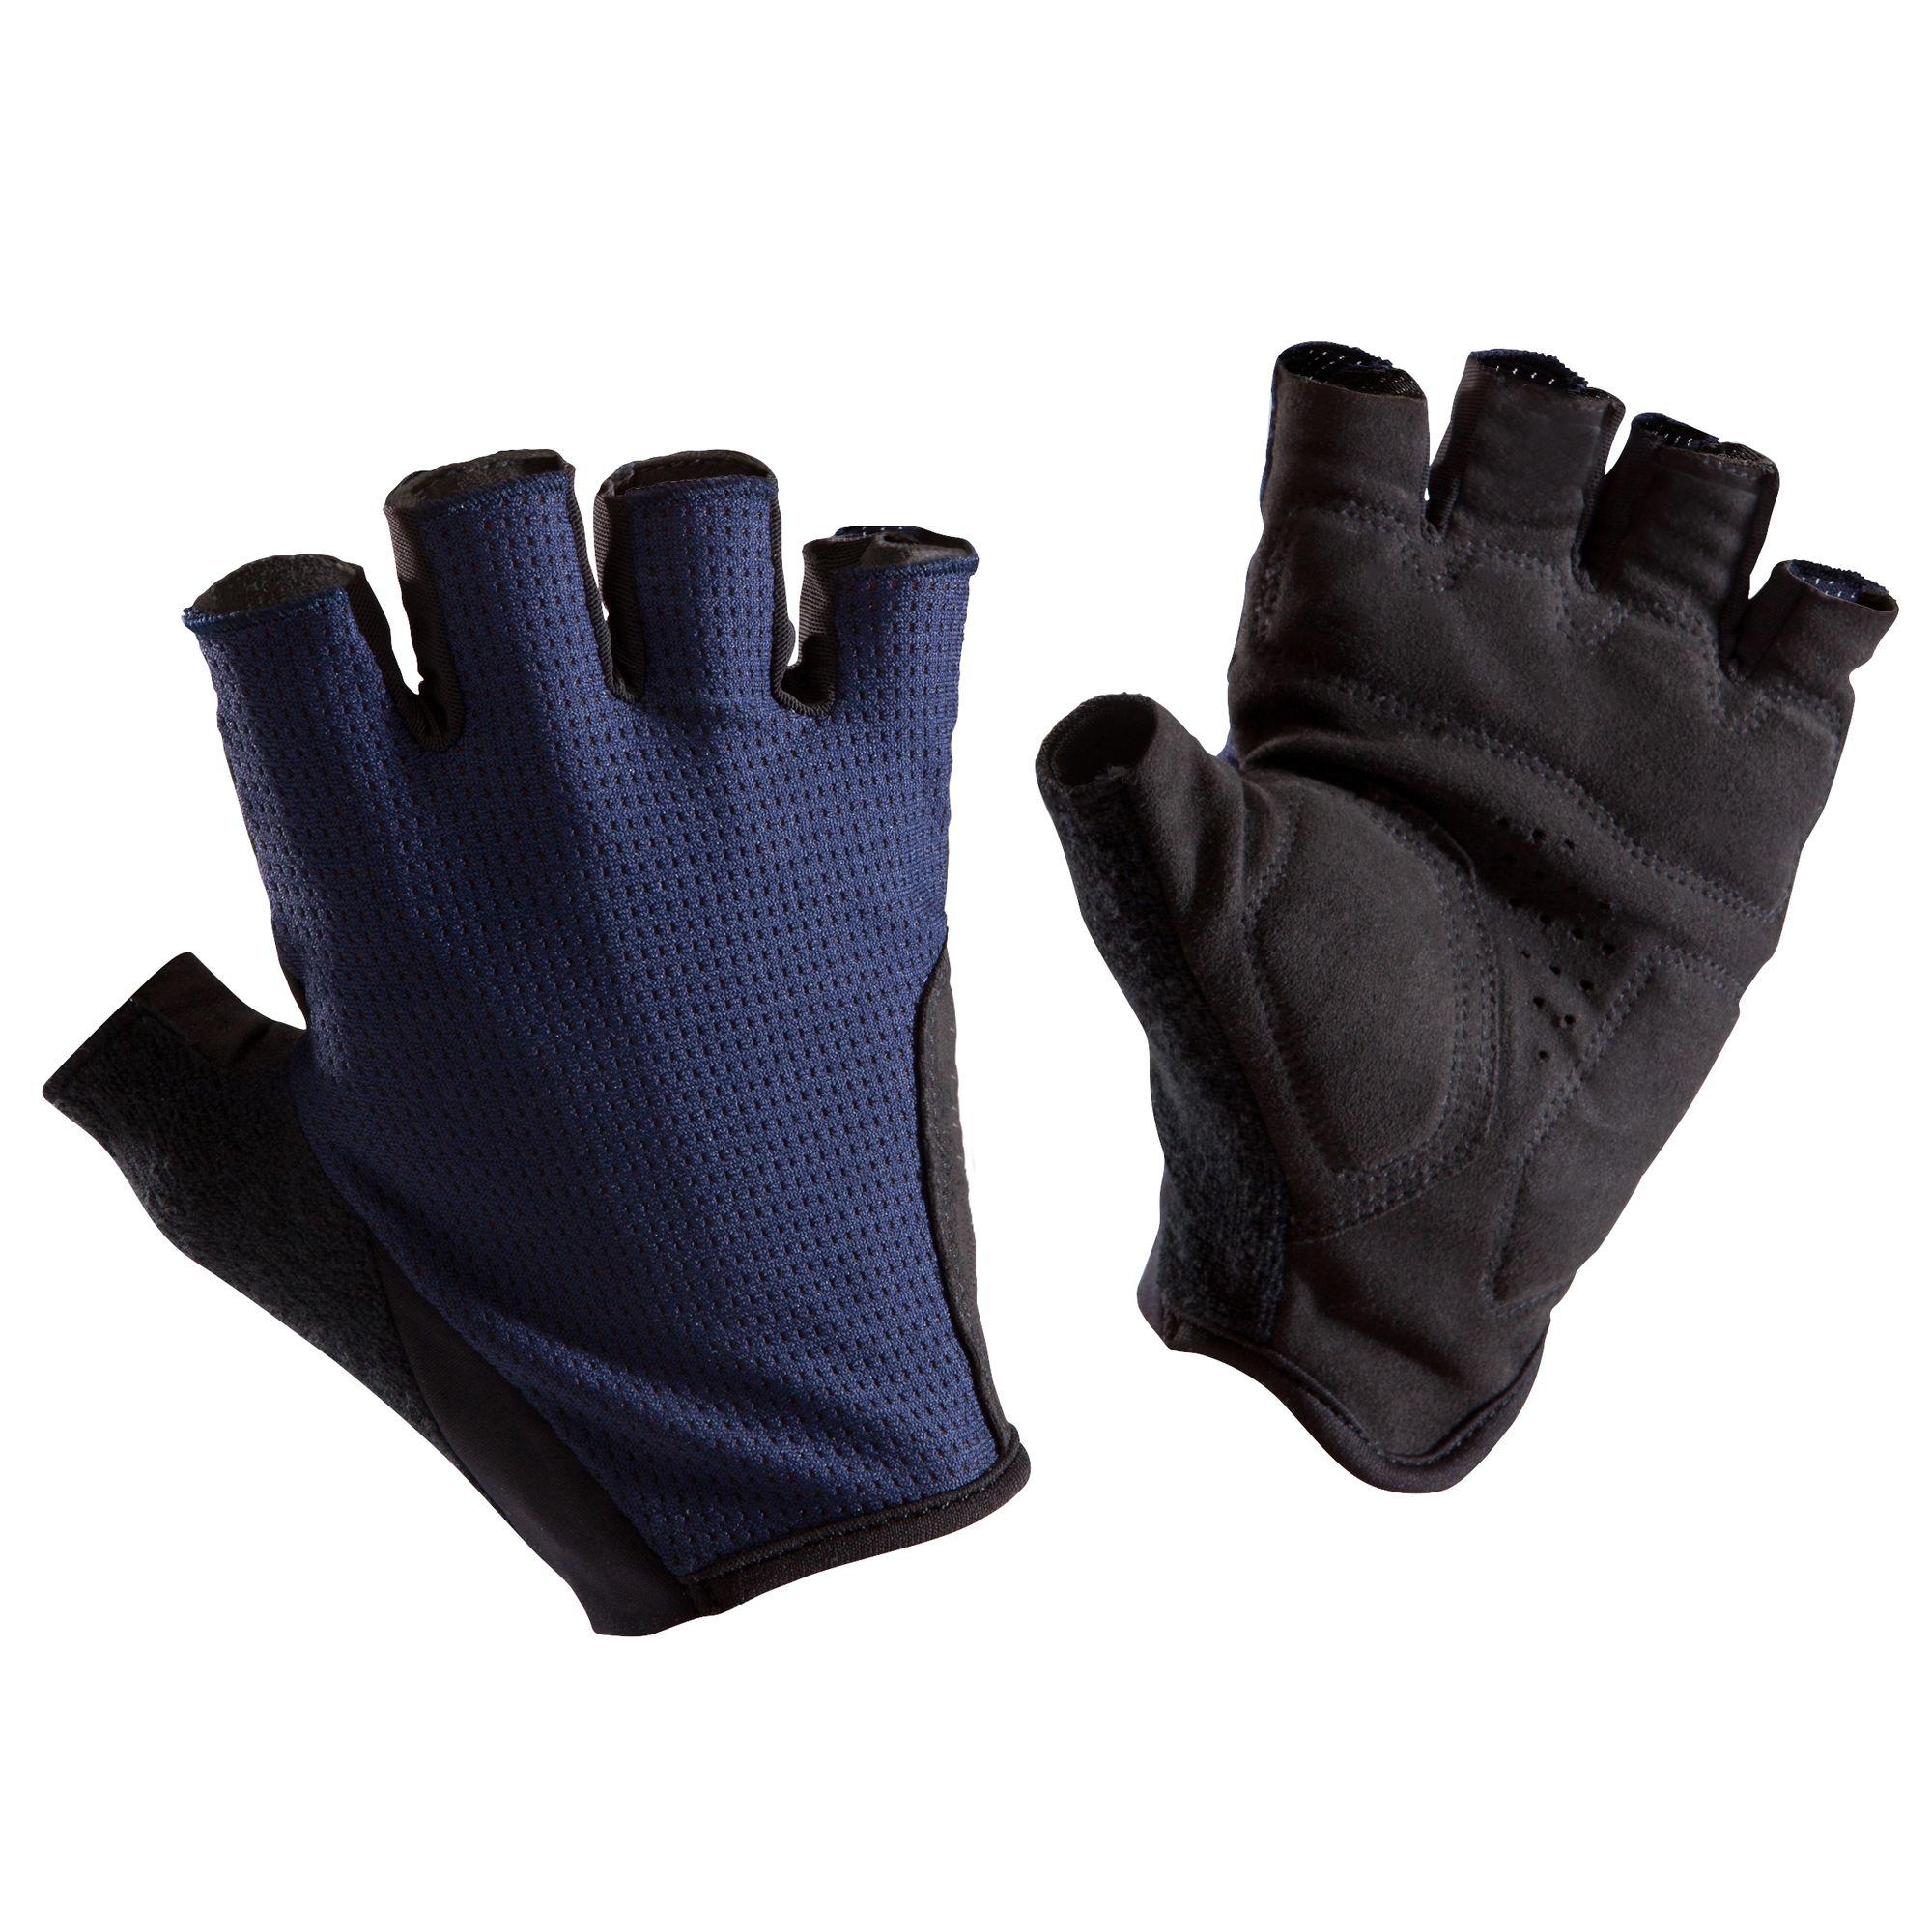 target cycling gloves